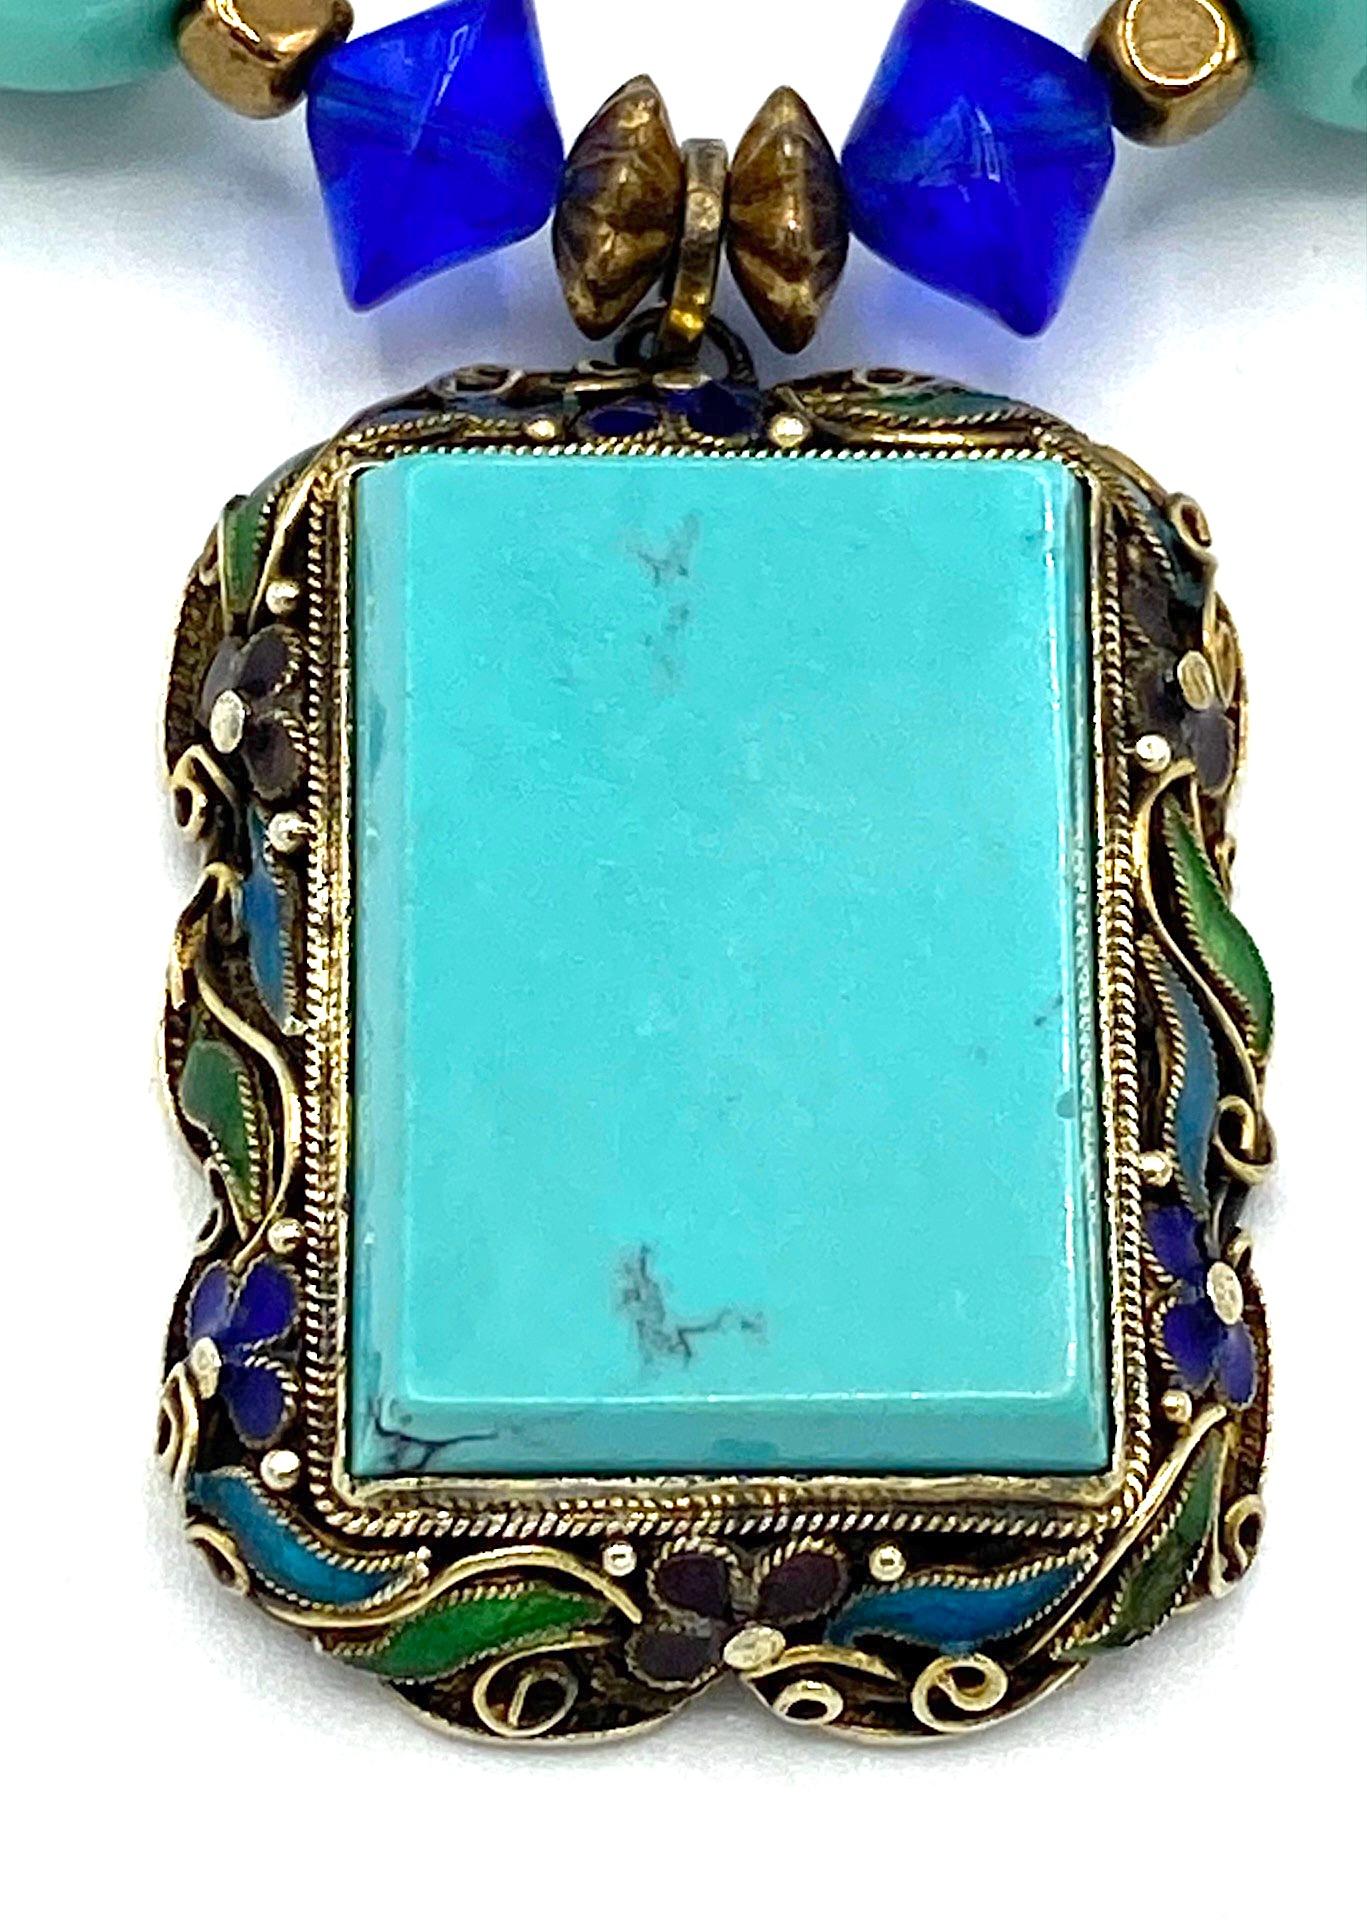 A lovely Chinese esport necklace featuring a pendant and clasp of sliver with natural Chinese turquoise. The pendant is gilt silver filigree with green, purple, light and dark blue enamel flowers and accents. Mounted in the center is natural Chinese